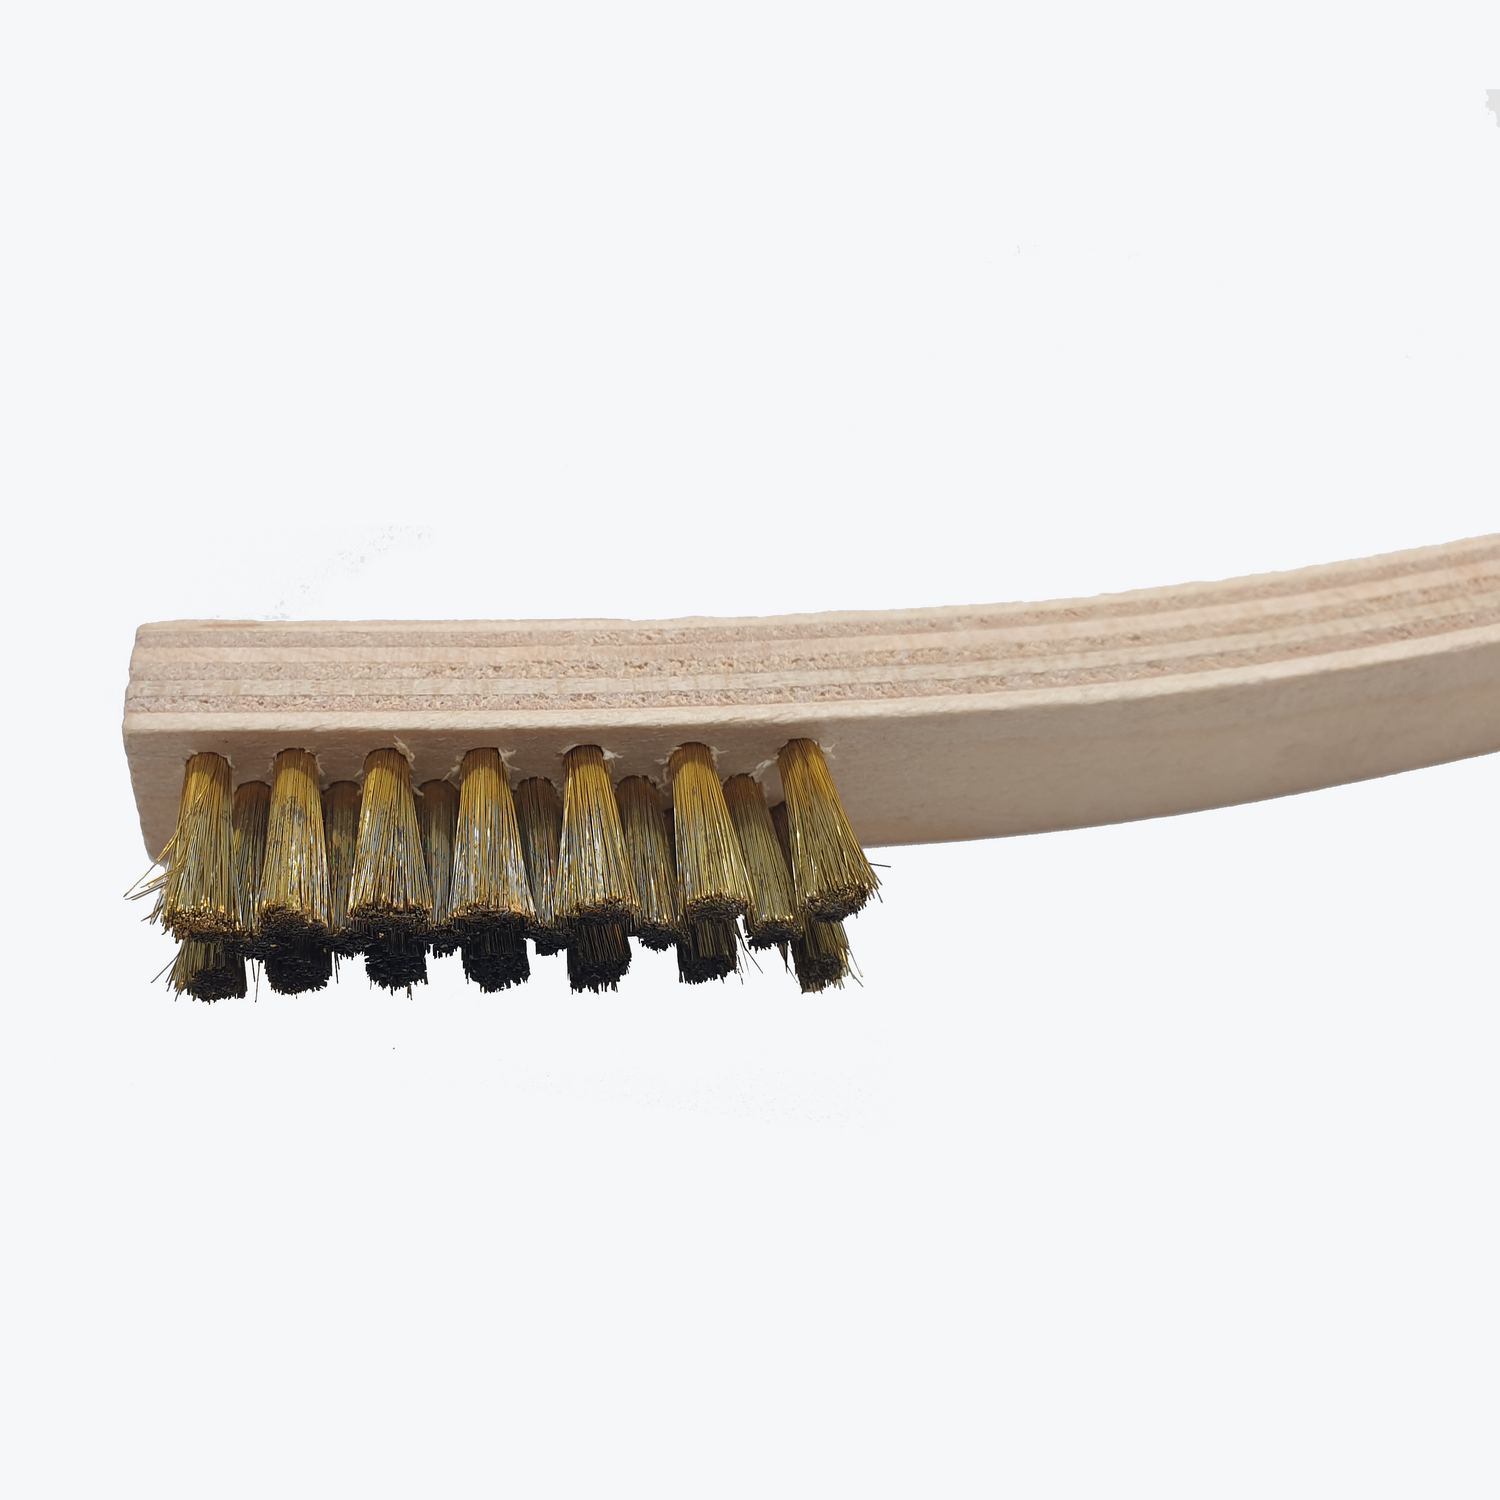 Techspray wooden handle 2025-1 esd safe antistatic soft brass cleaning and coating of printed circuit board